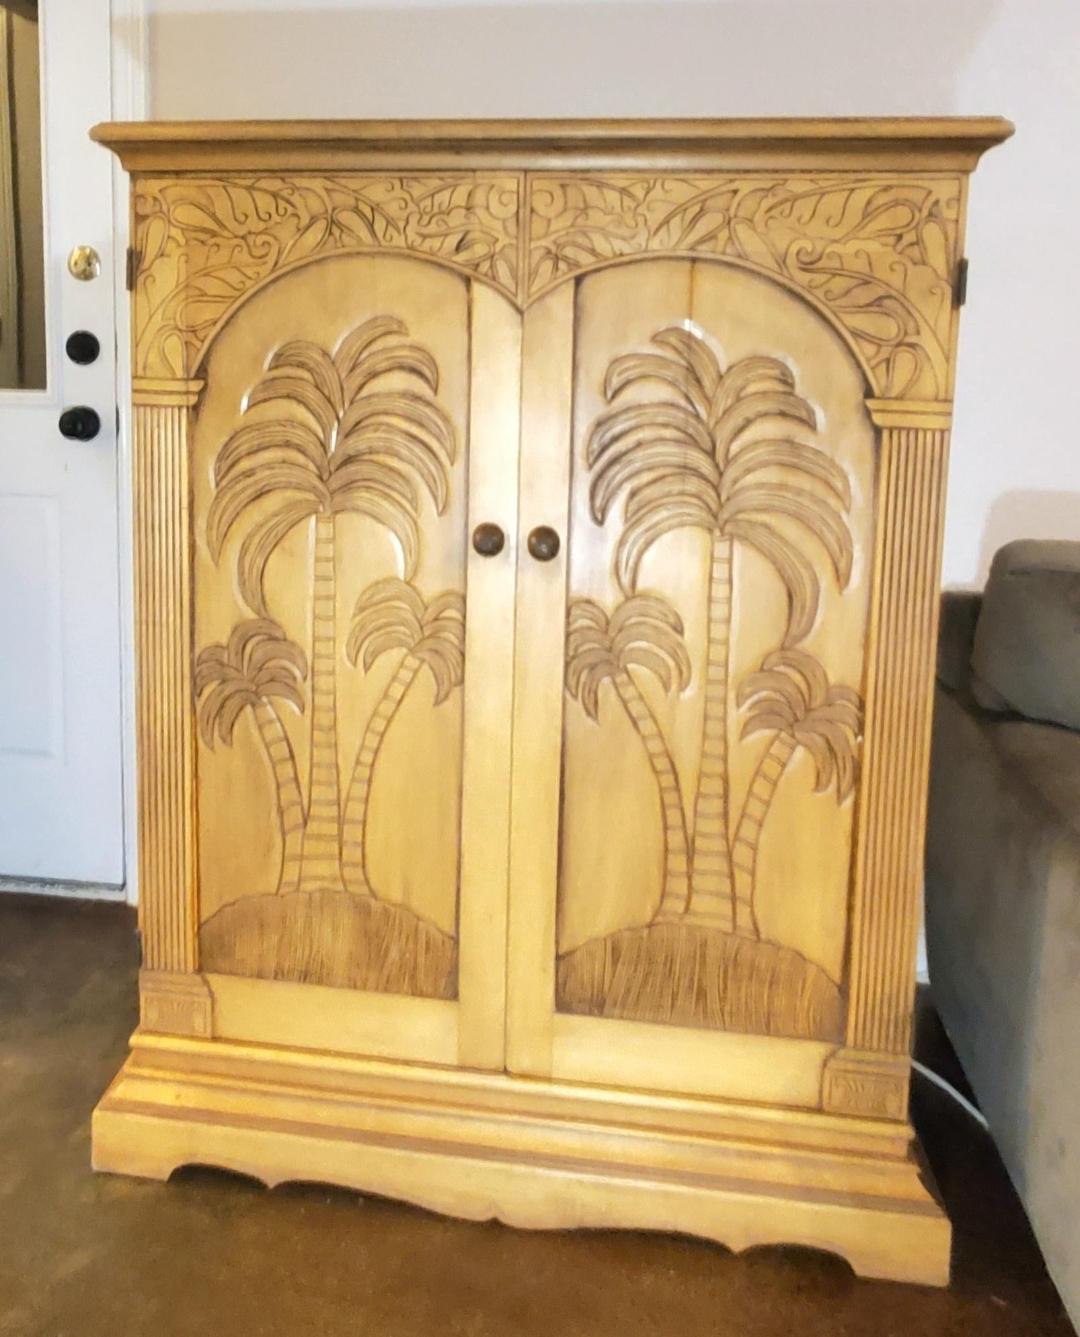 Hand carved on the front, sides and top.
Hand carved knobs.
There's even details in the shelves that slide out.
Intricate dovetails I've never seen before.
Solid wood, not veneer.
Shelves slide all the way out.
Doors open and fold to the